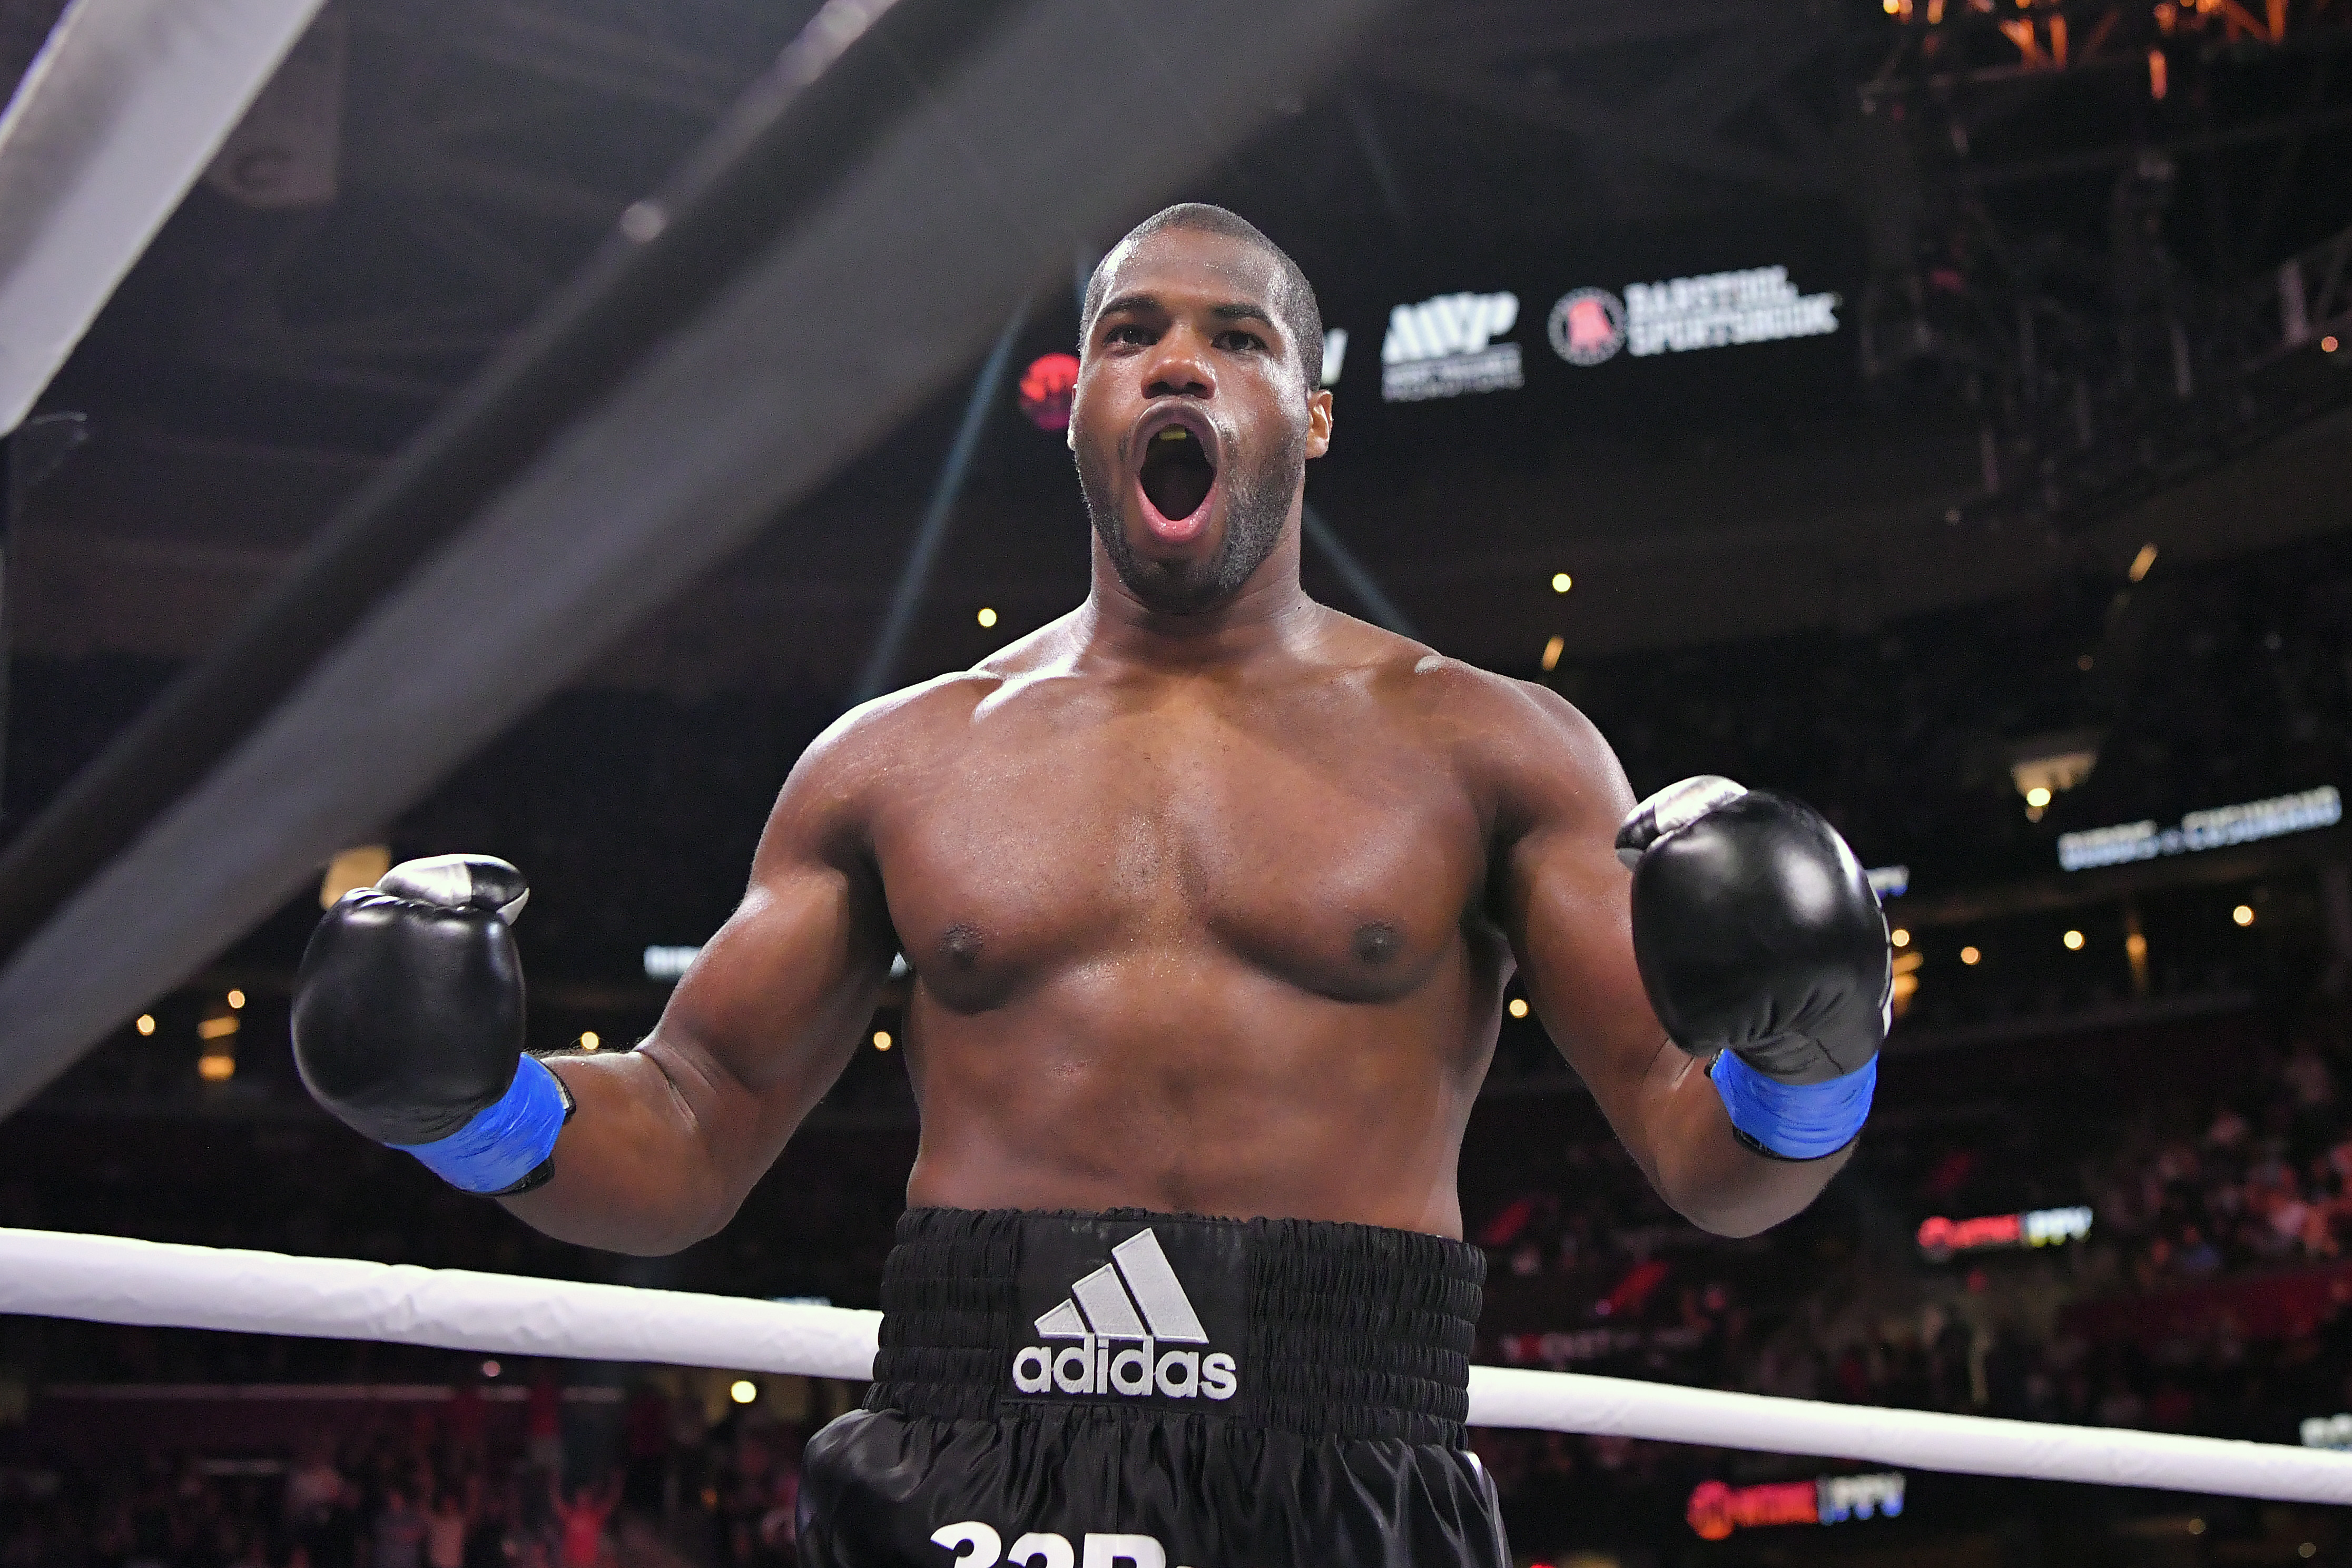 Daniel Dubois celebrates after knocking out Juan Carlos Rubio in their heavyweight bout during a Showtime pay-per-view event at Rocket Morgage Fieldhouse on August 29, 2021 in Cleveland, Ohio.